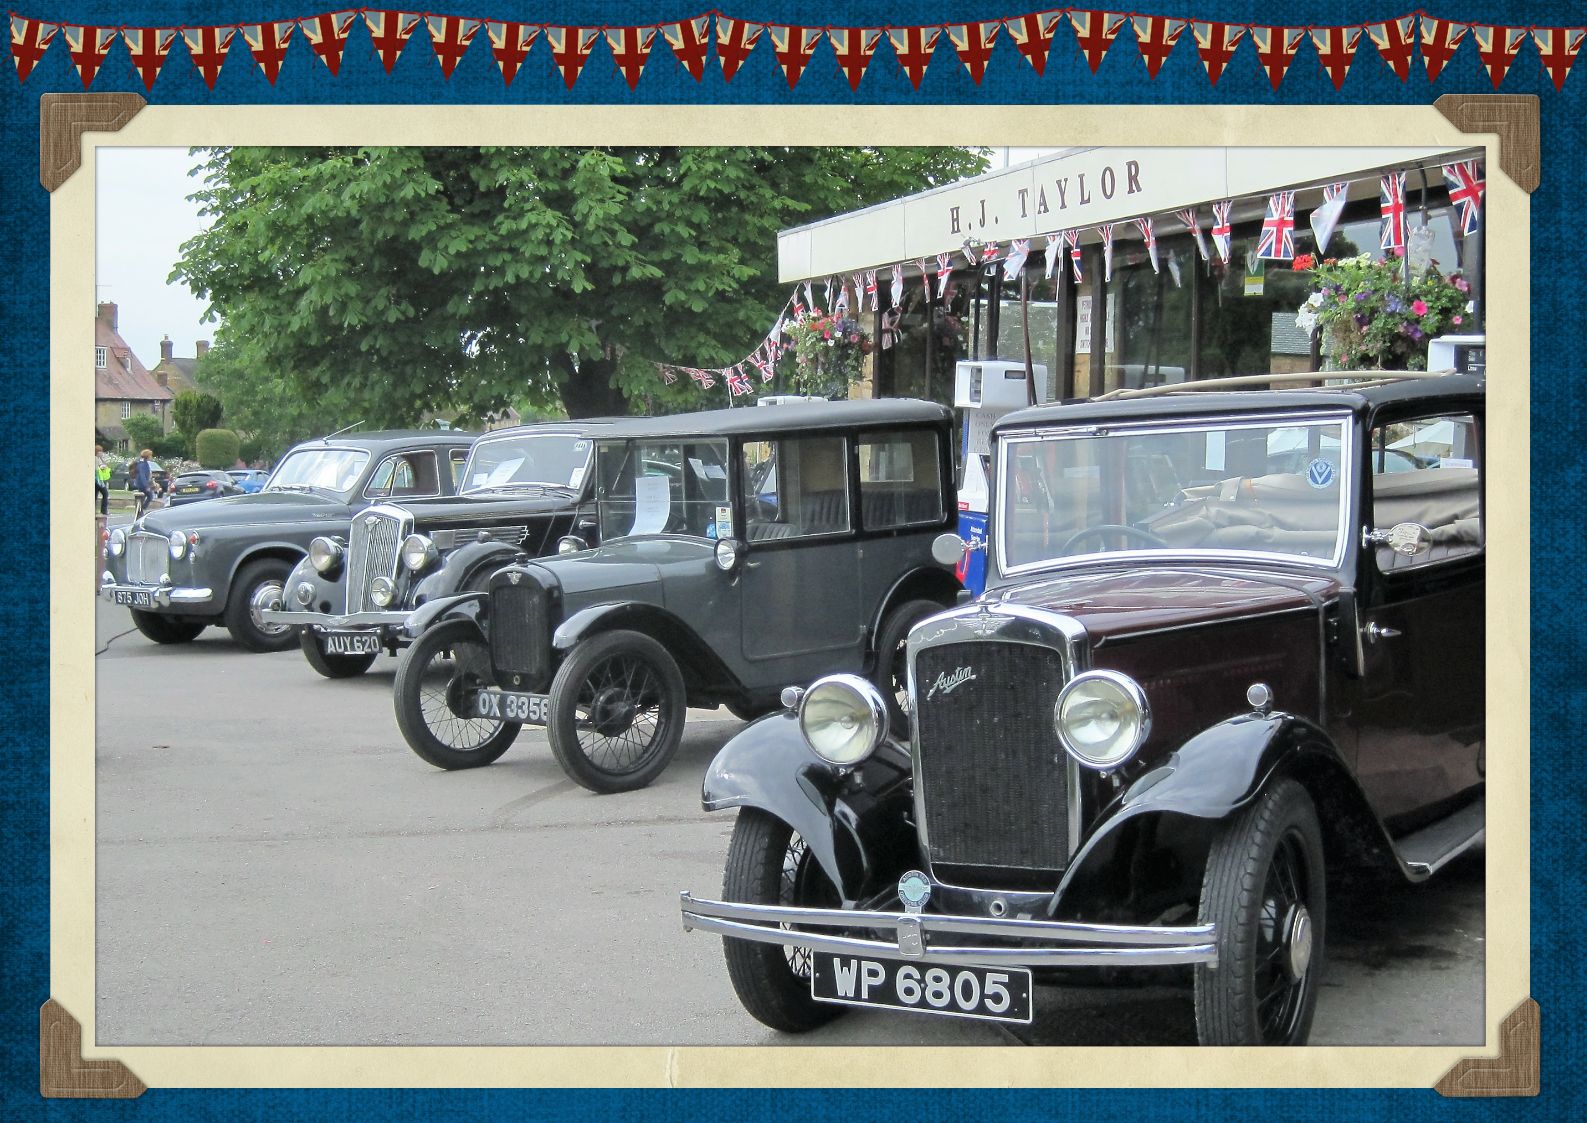 Vintage cars for the Queen